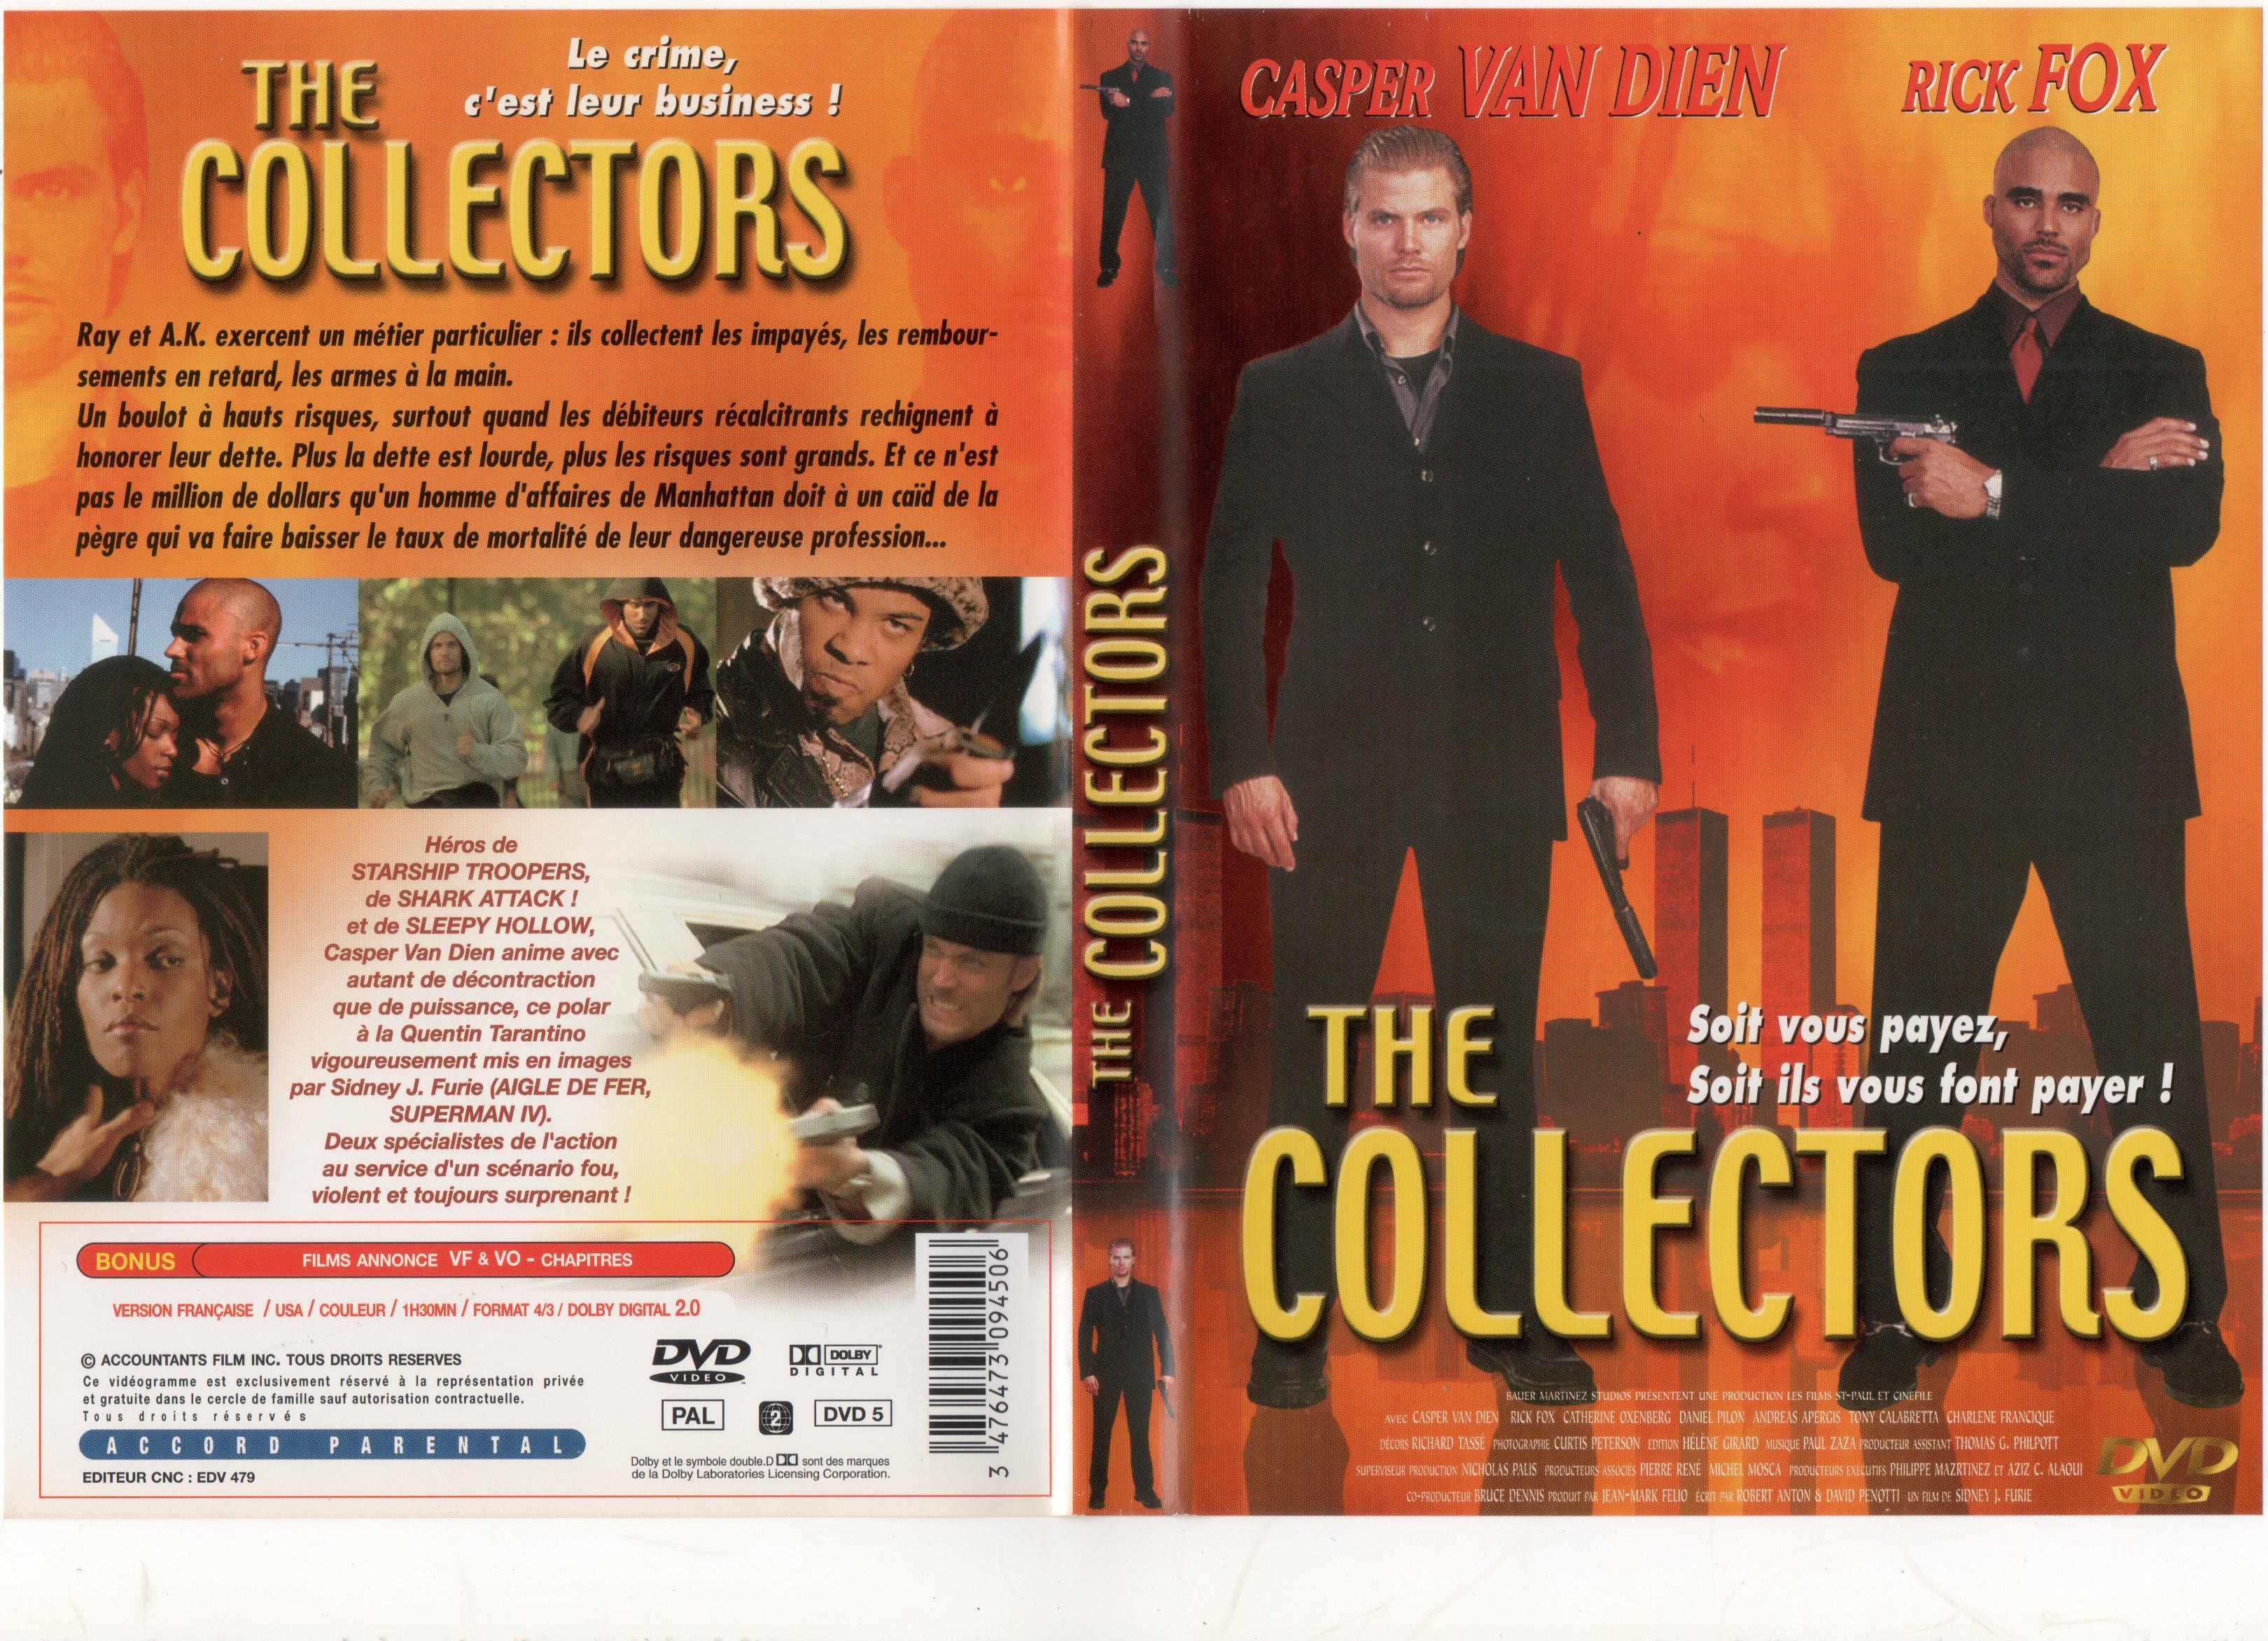 Jaquette DVD The collectors